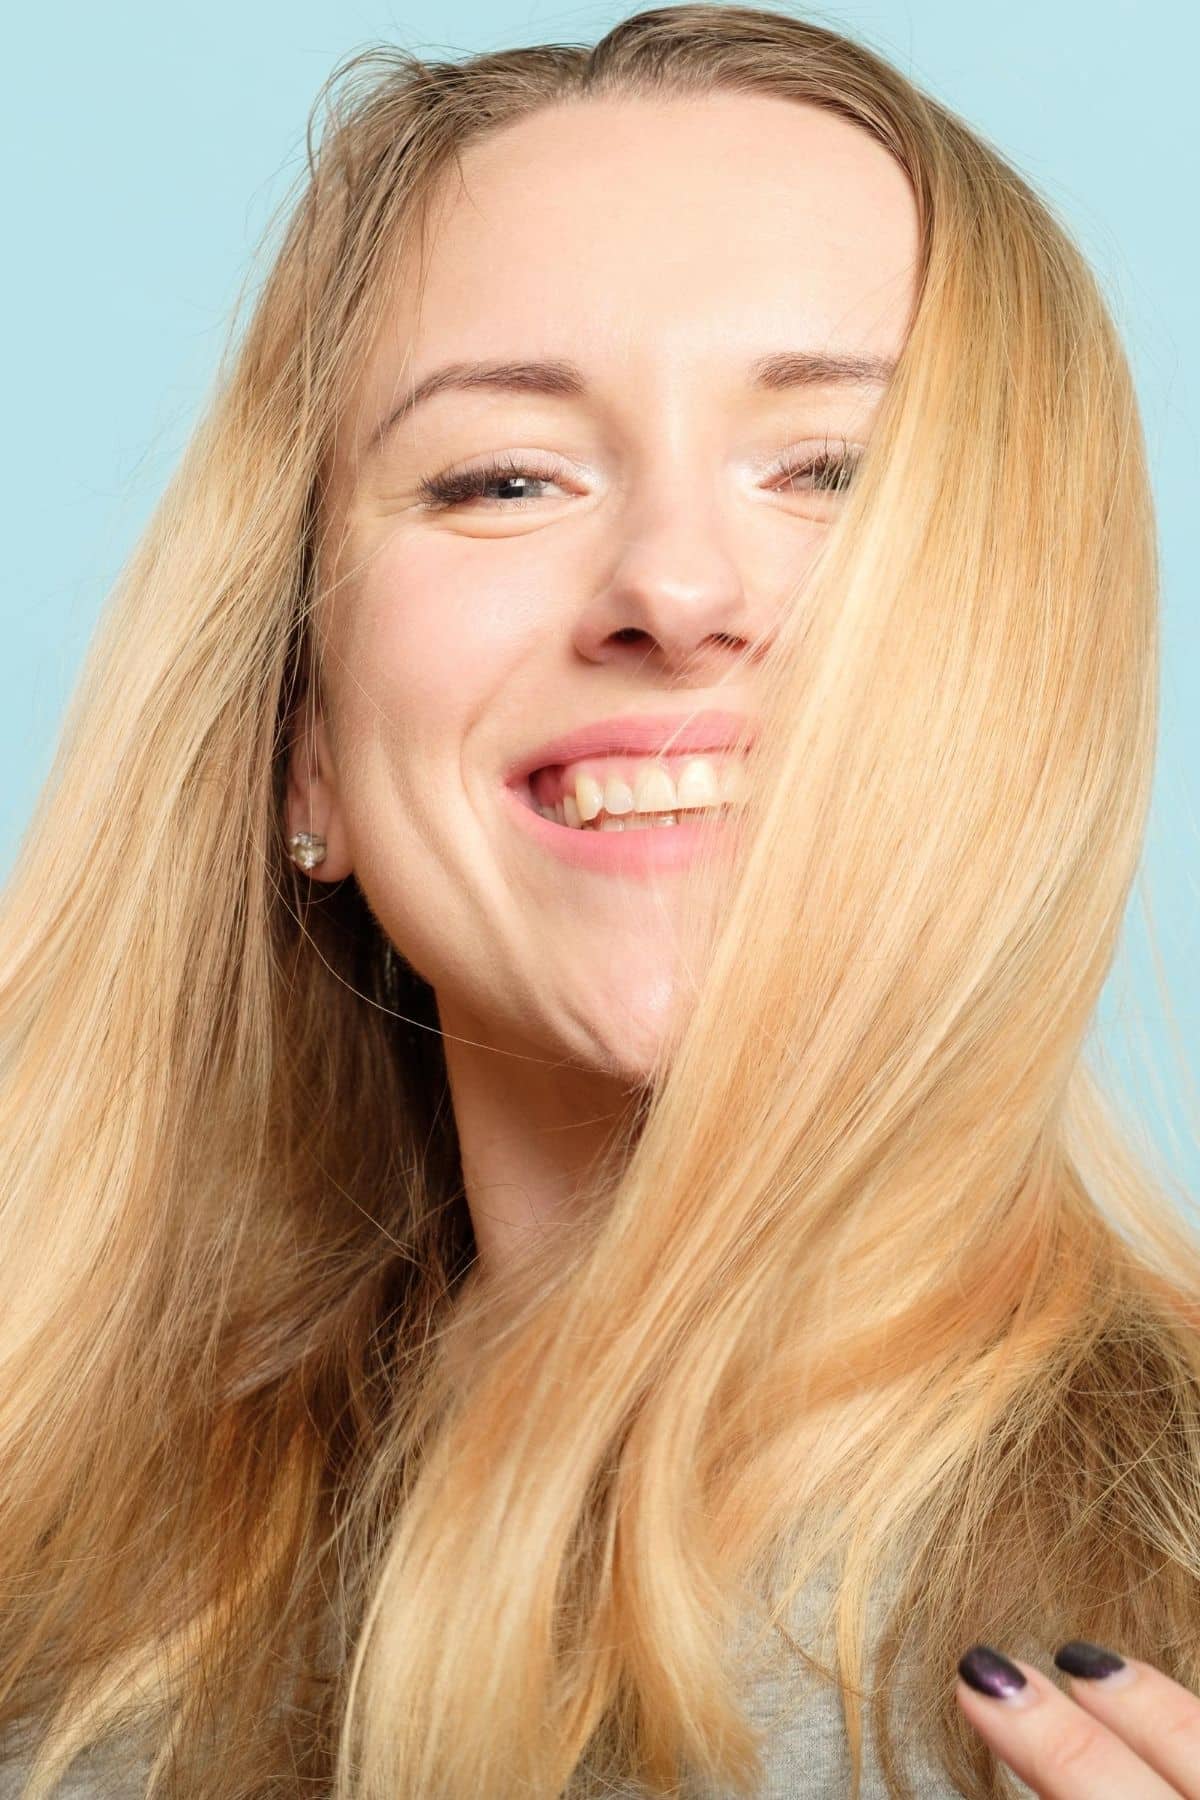 woman with long blond hair smiling at the camera.